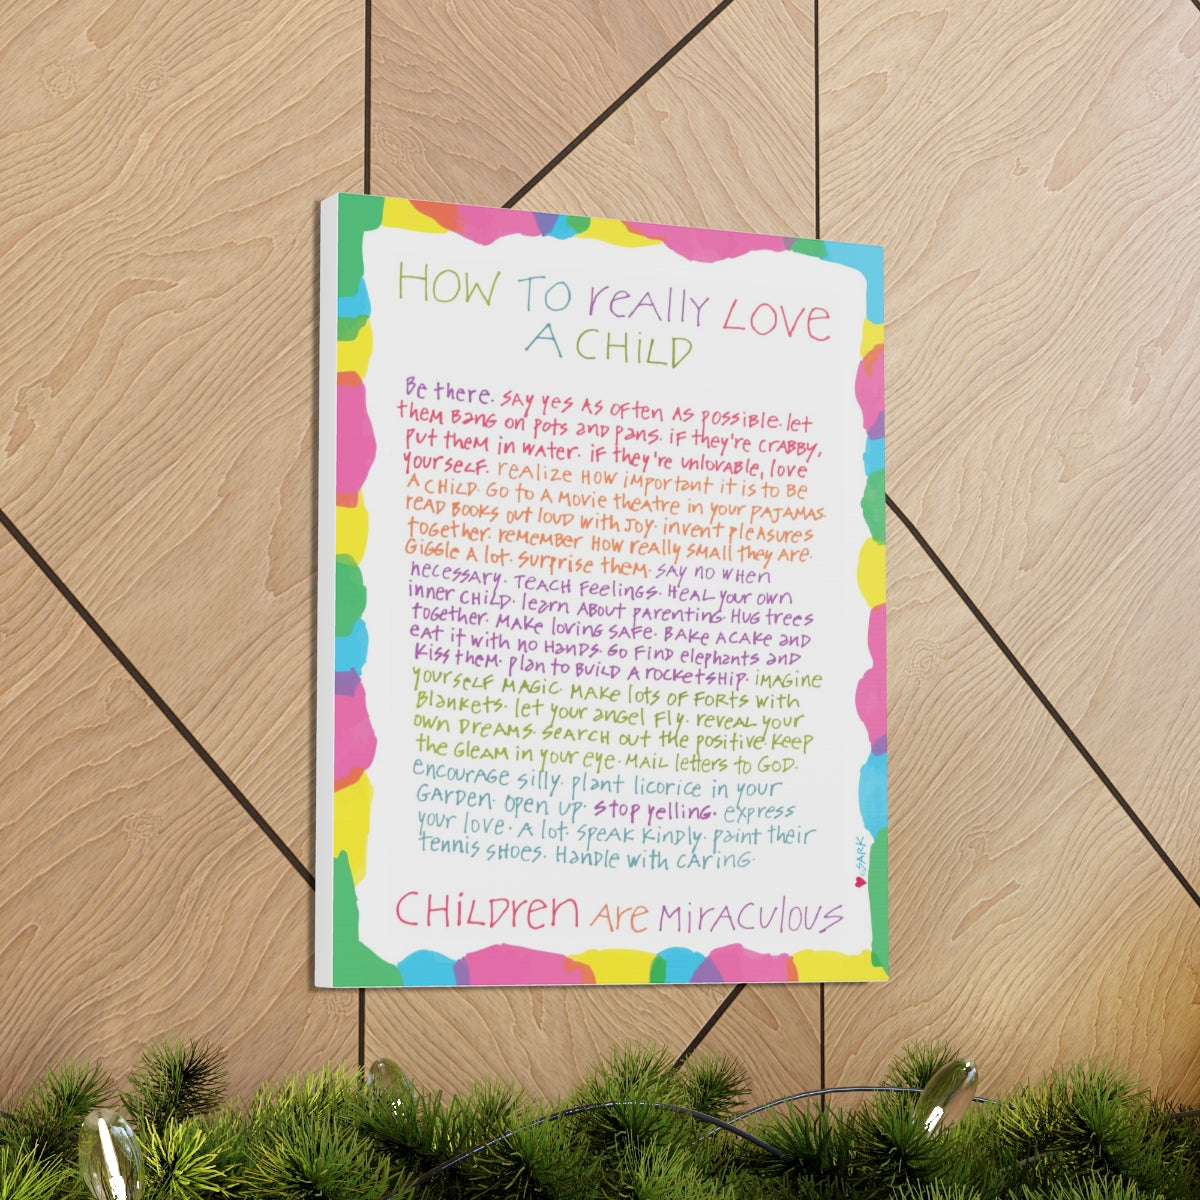 How To Really Love A Child by SARK - Canvas Gallery Wraps